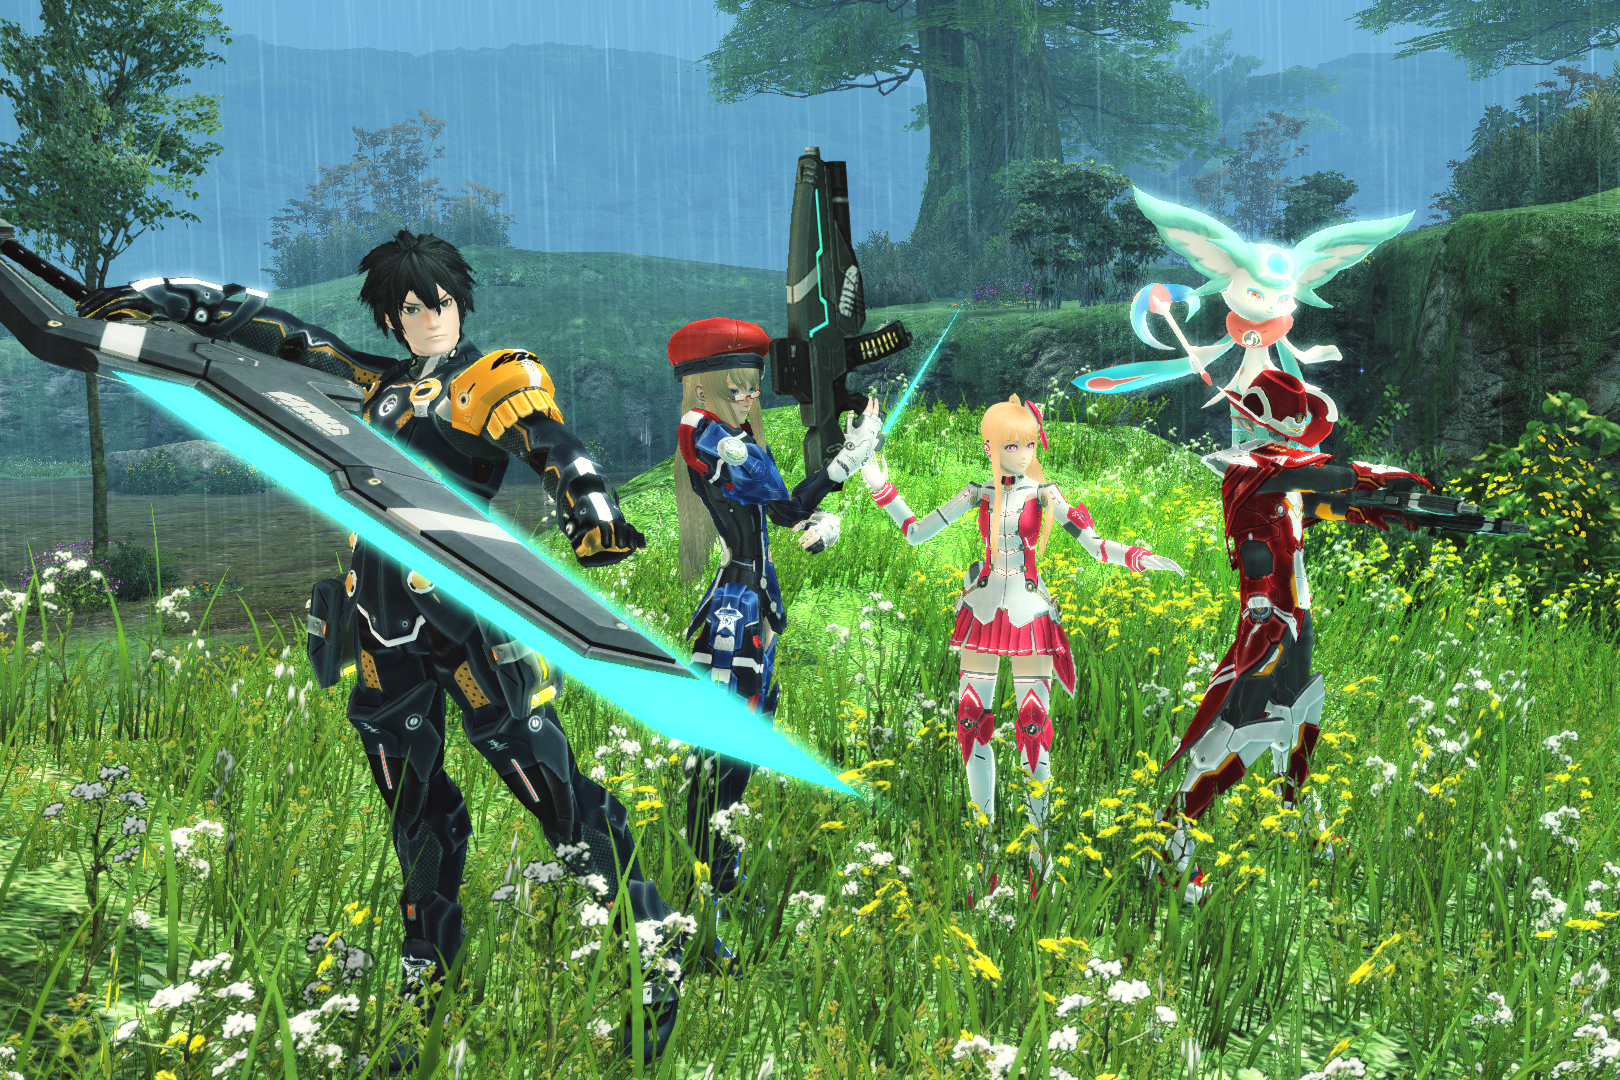 Top 3 Browser-Based MMORPGs to play right now